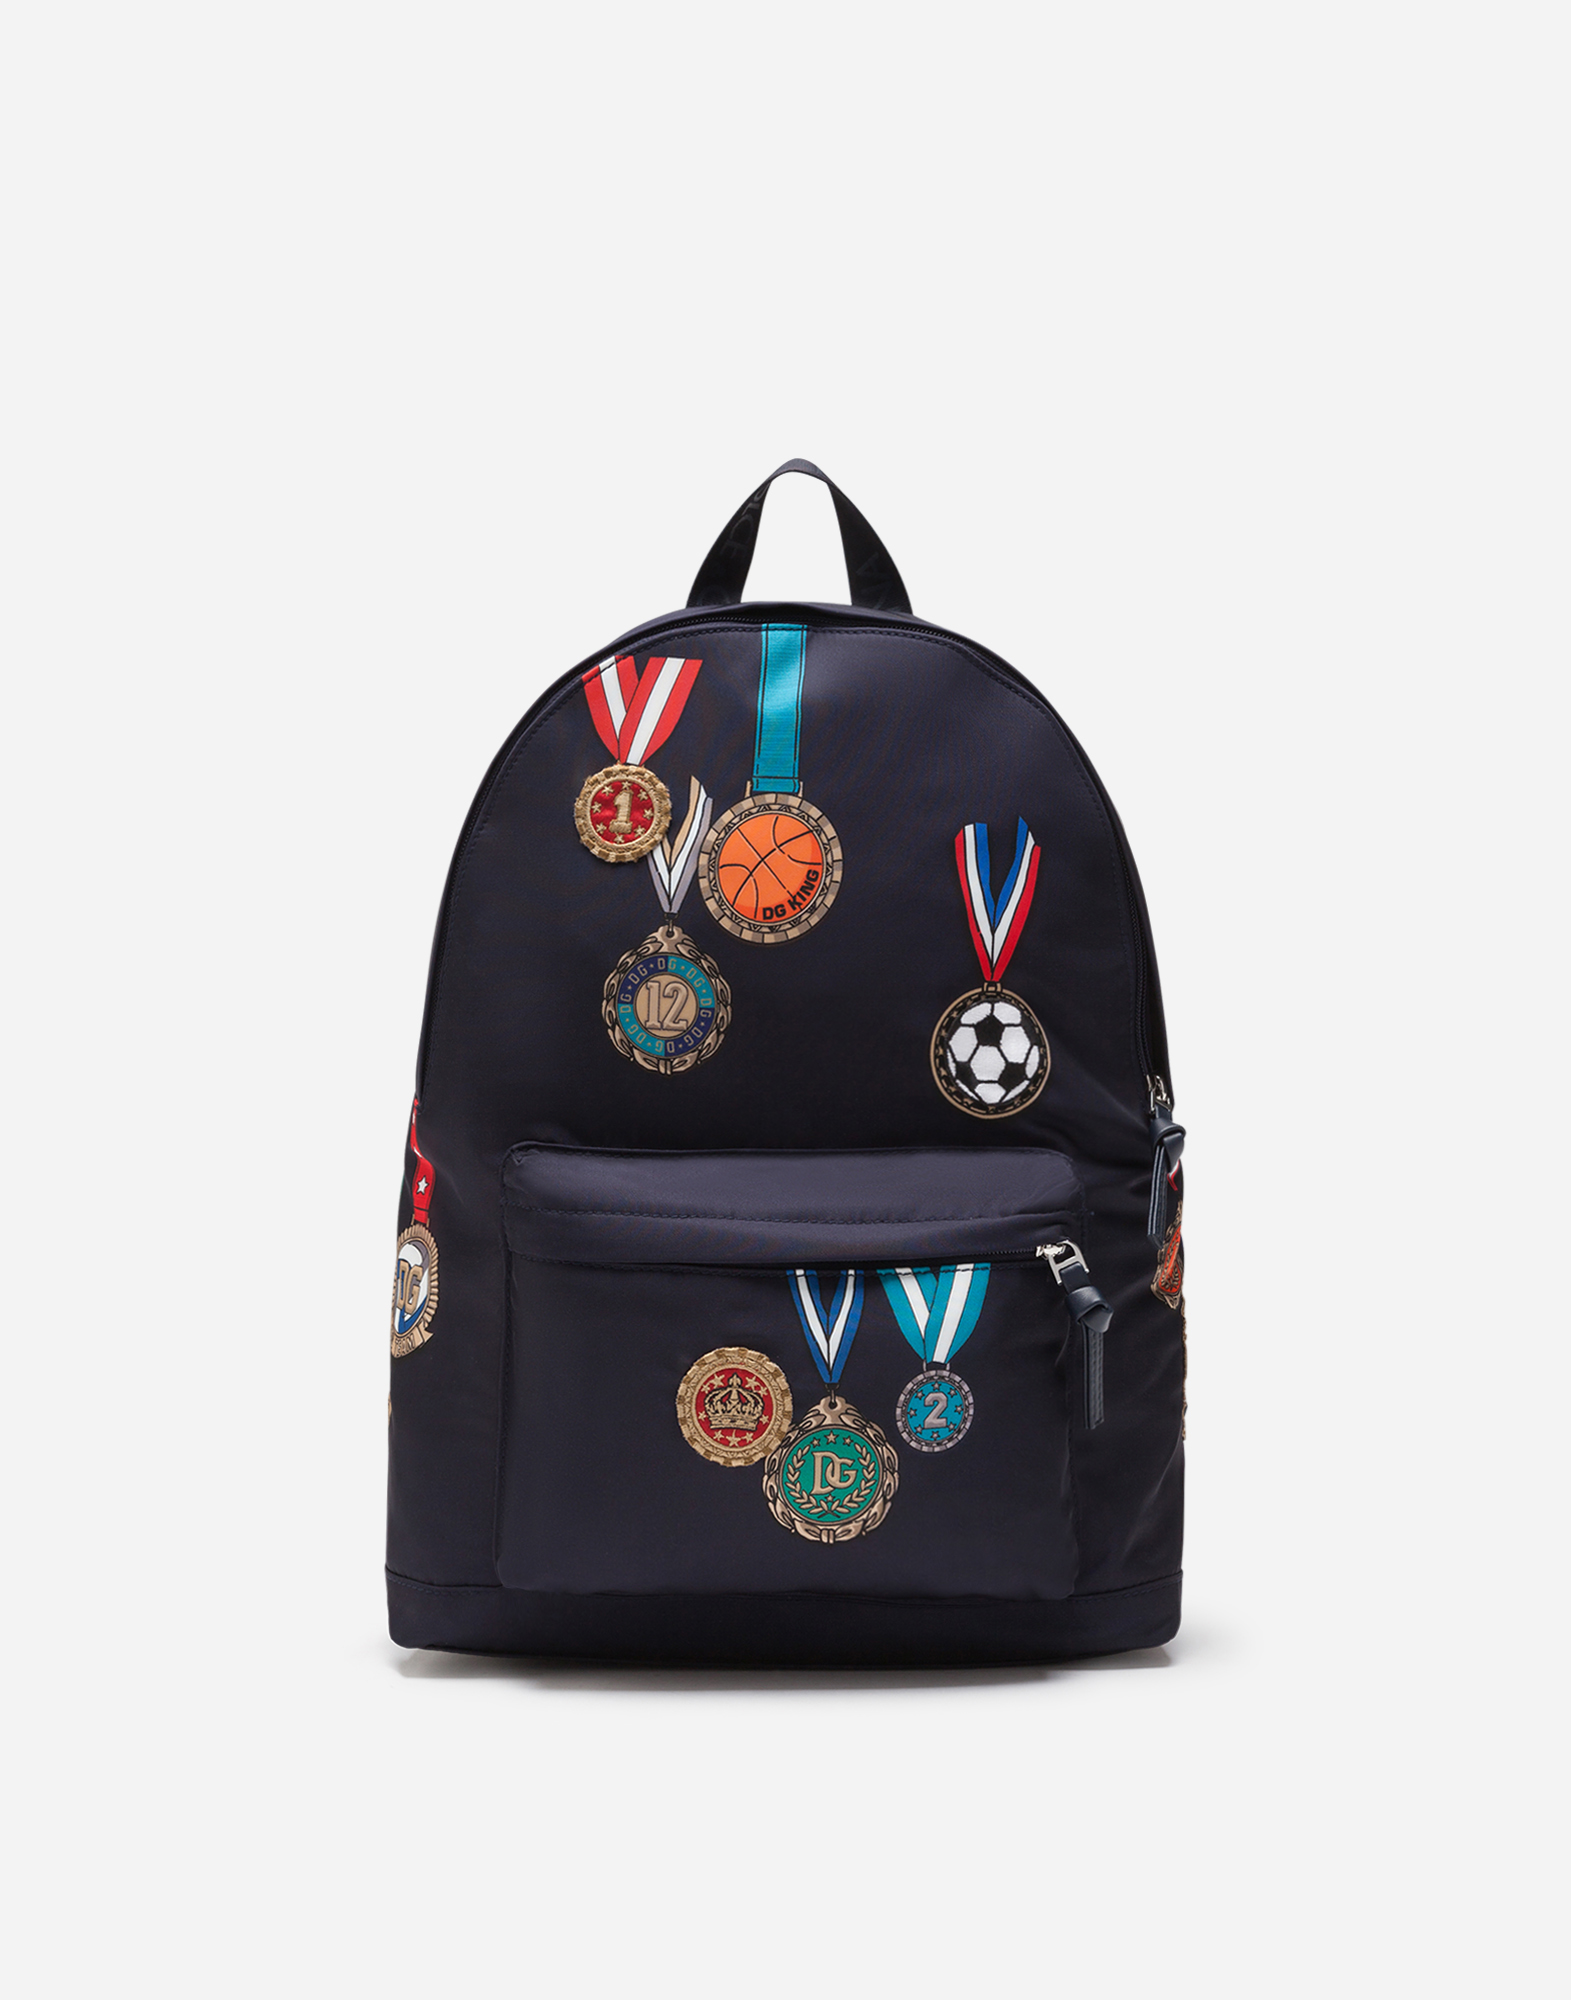 DOLCE & GABBANA Nylon backpack with medal print